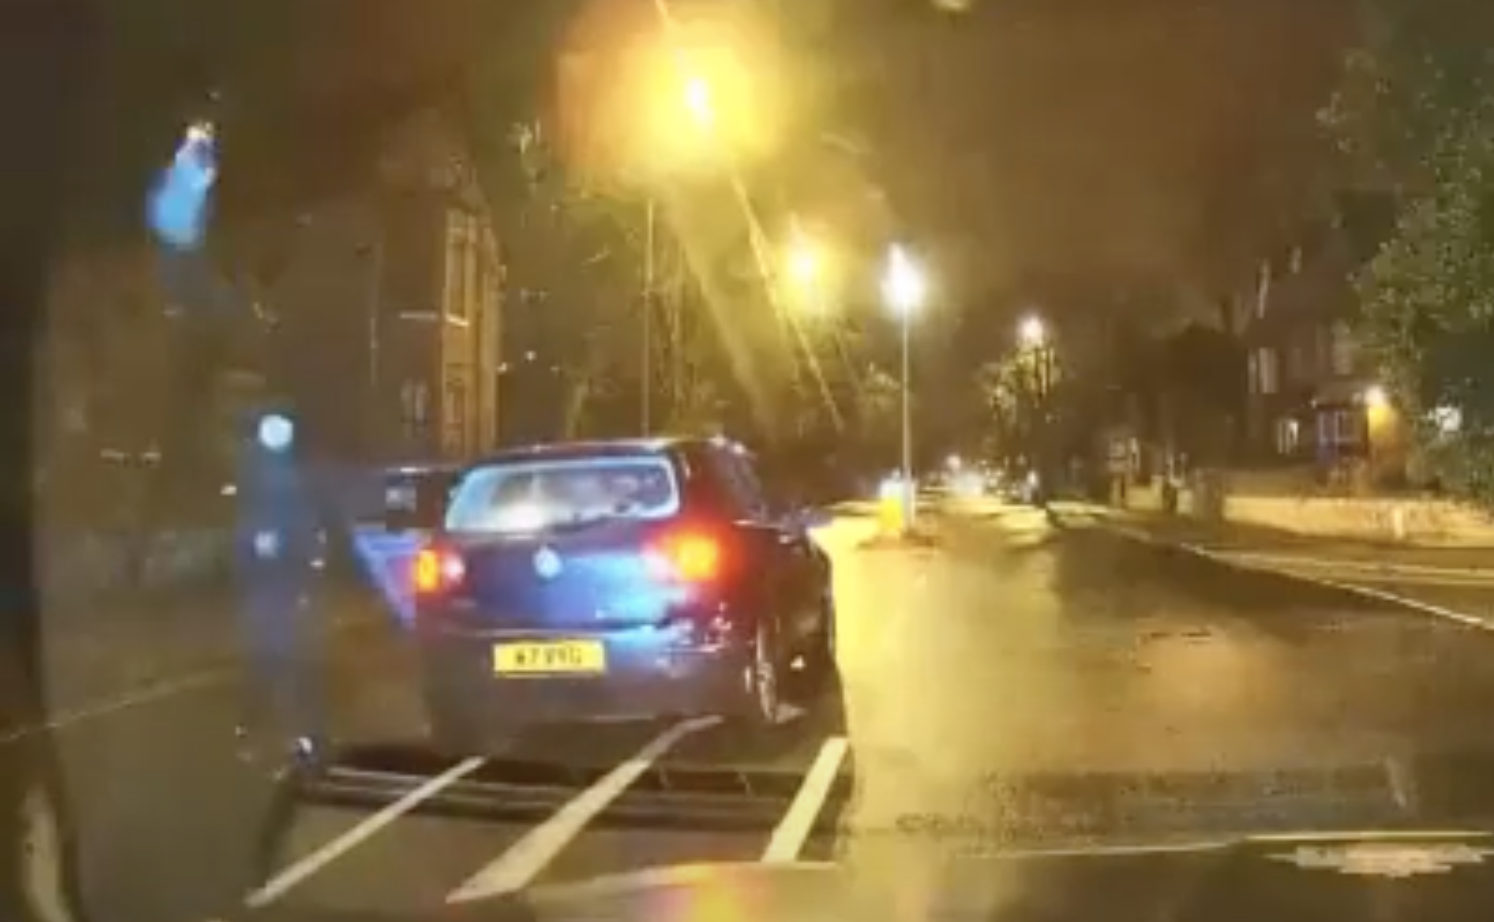 GMP chase footage shows man throw catalytic converter at police car in Didsbury, The Manc